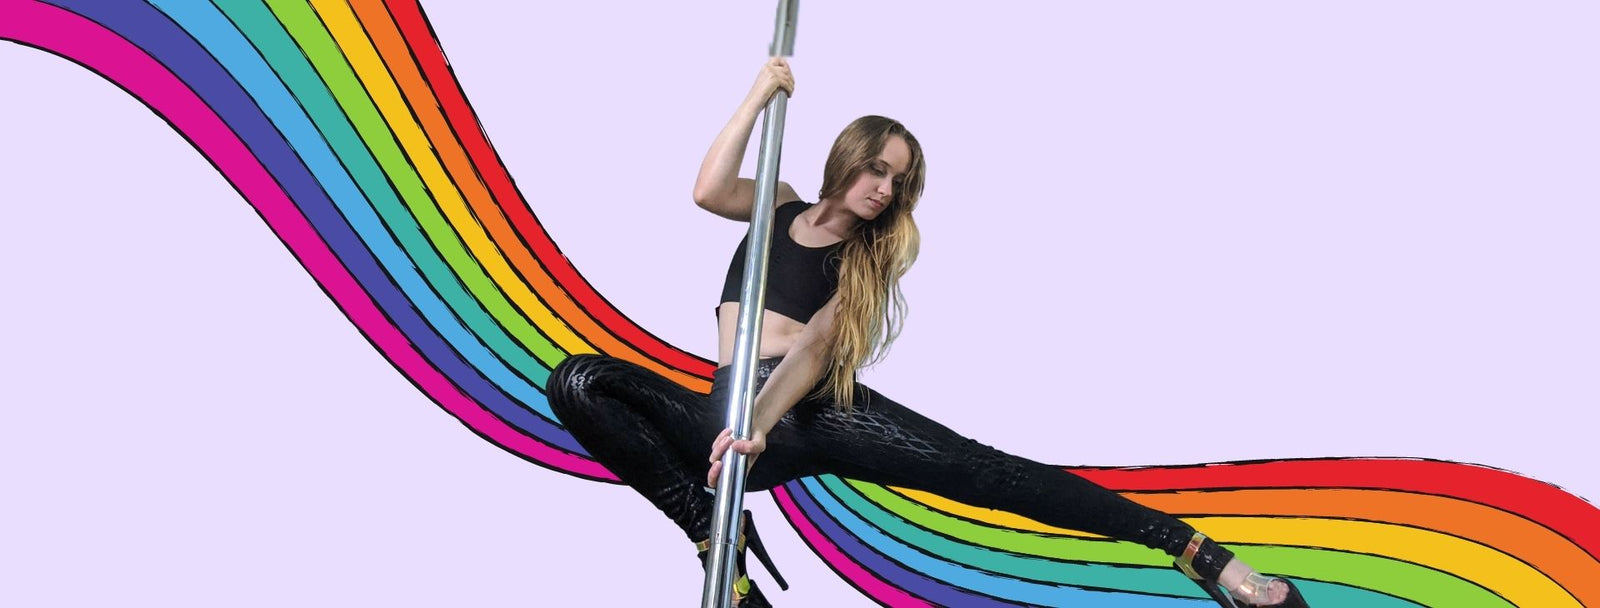 Guide] Grips and Holds  PolePedia - Learn Pole Dancing